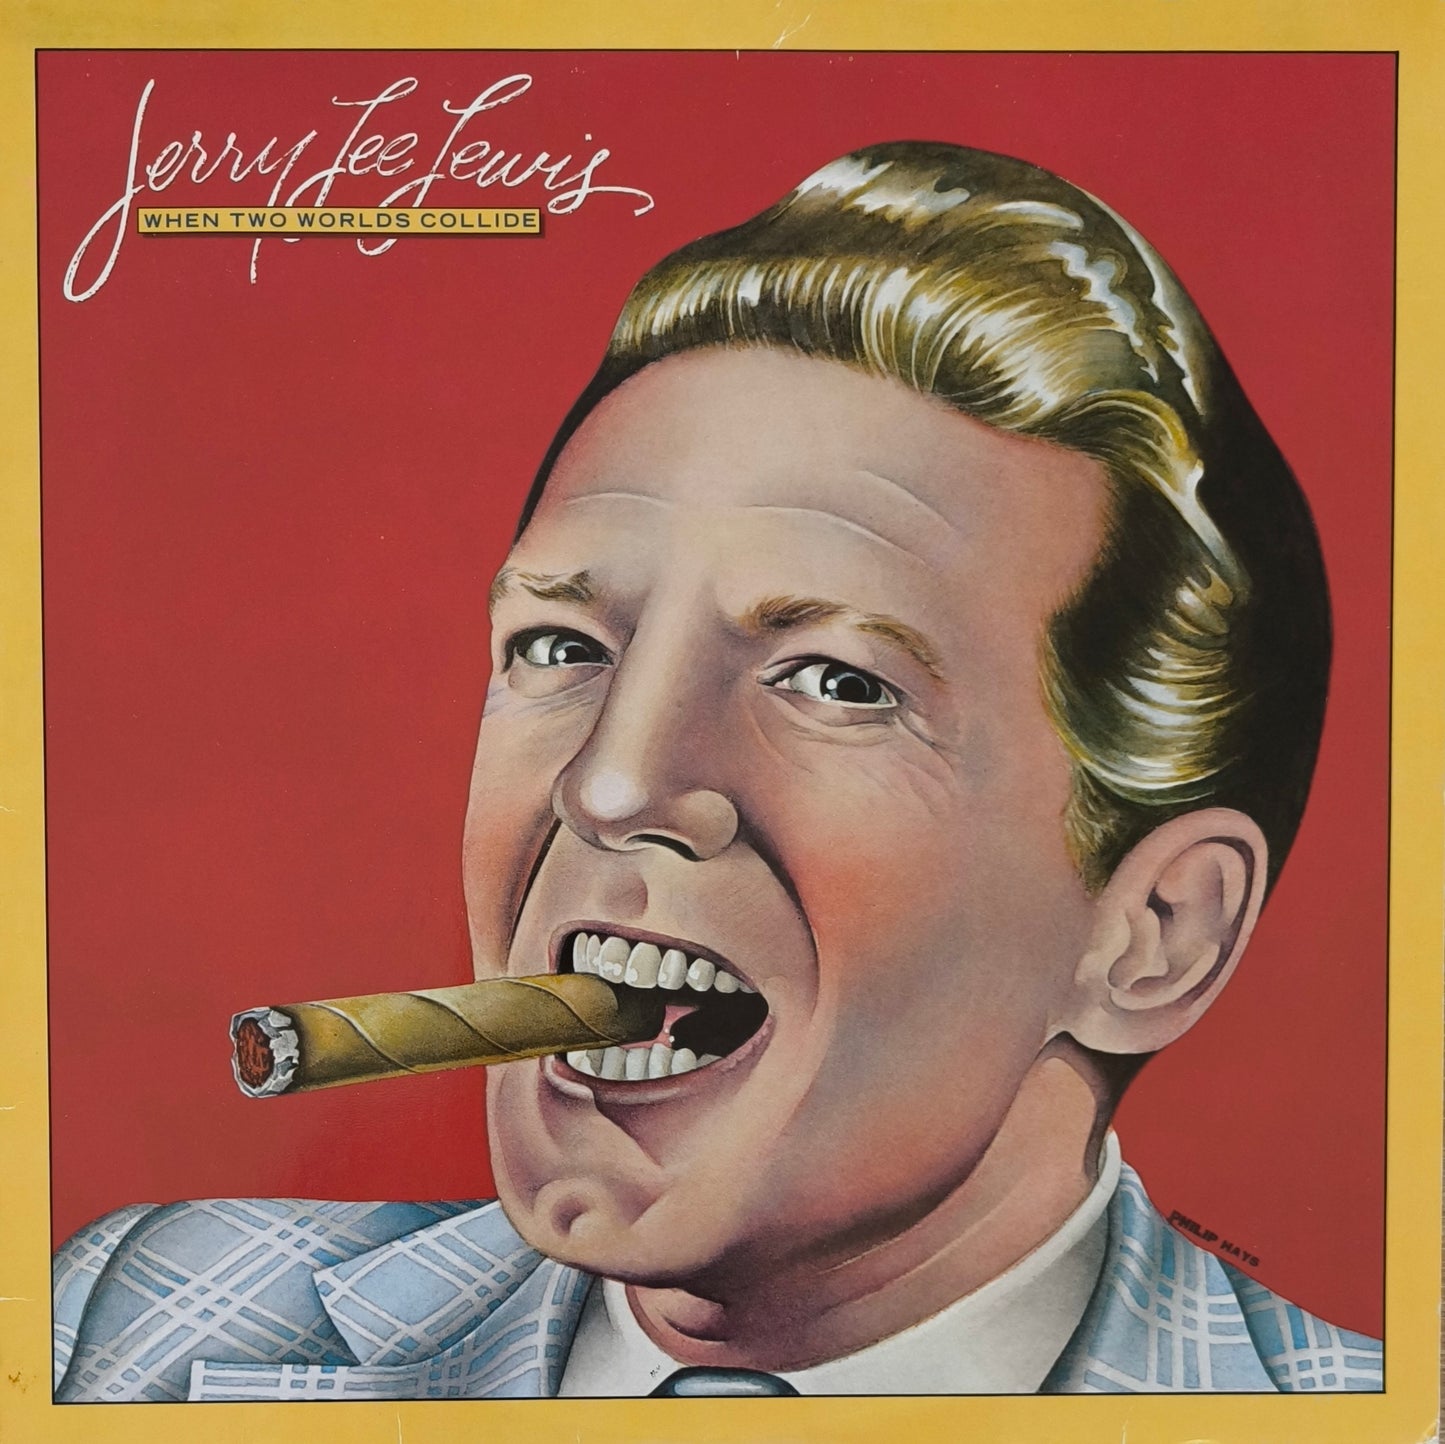 JERRY LEE LEWIS - When Two Worlds Collide